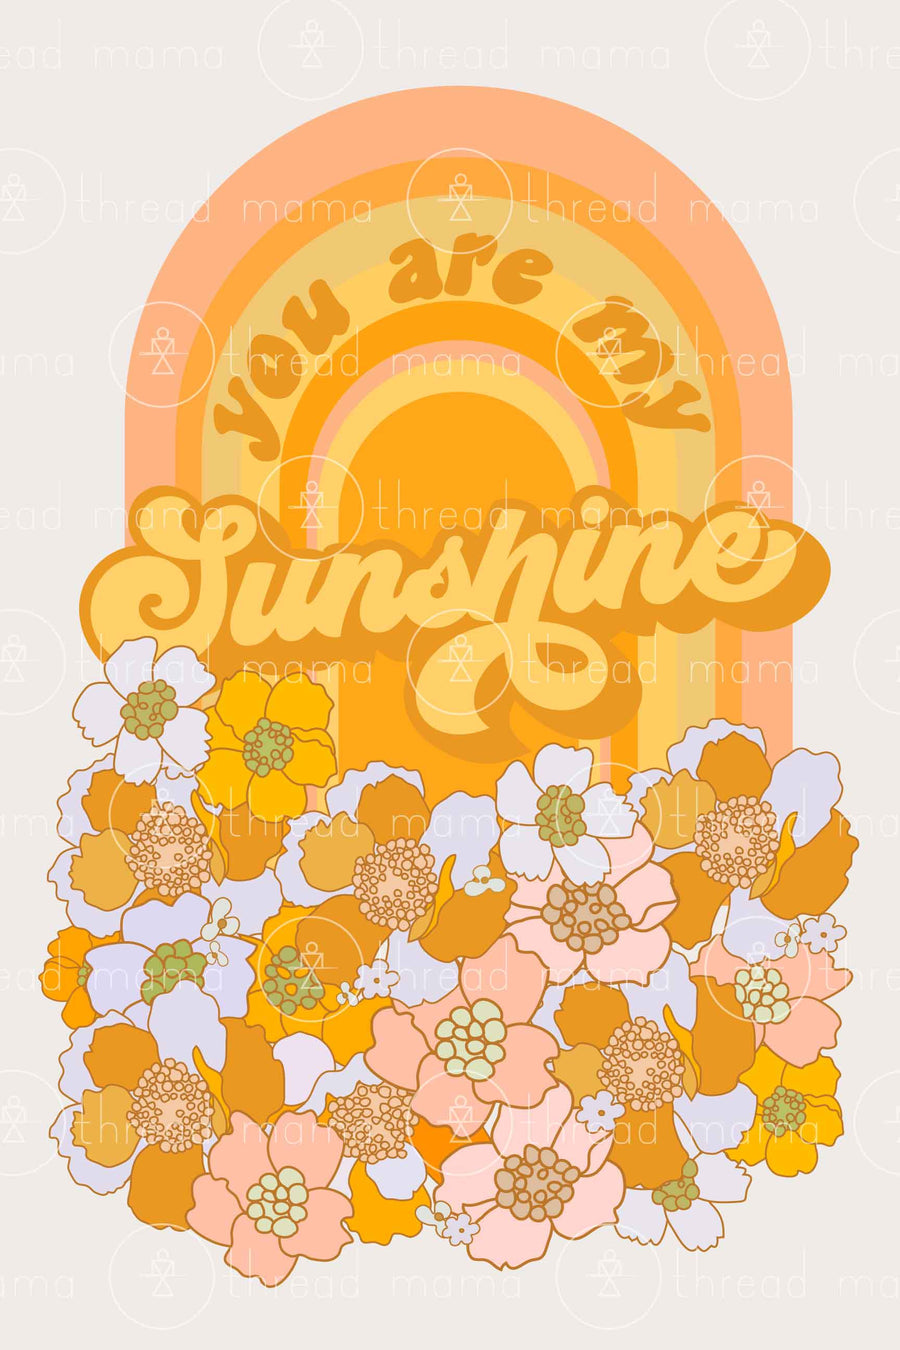 You are my Sunshine - 2 VERSIONS! (Printable Poster)